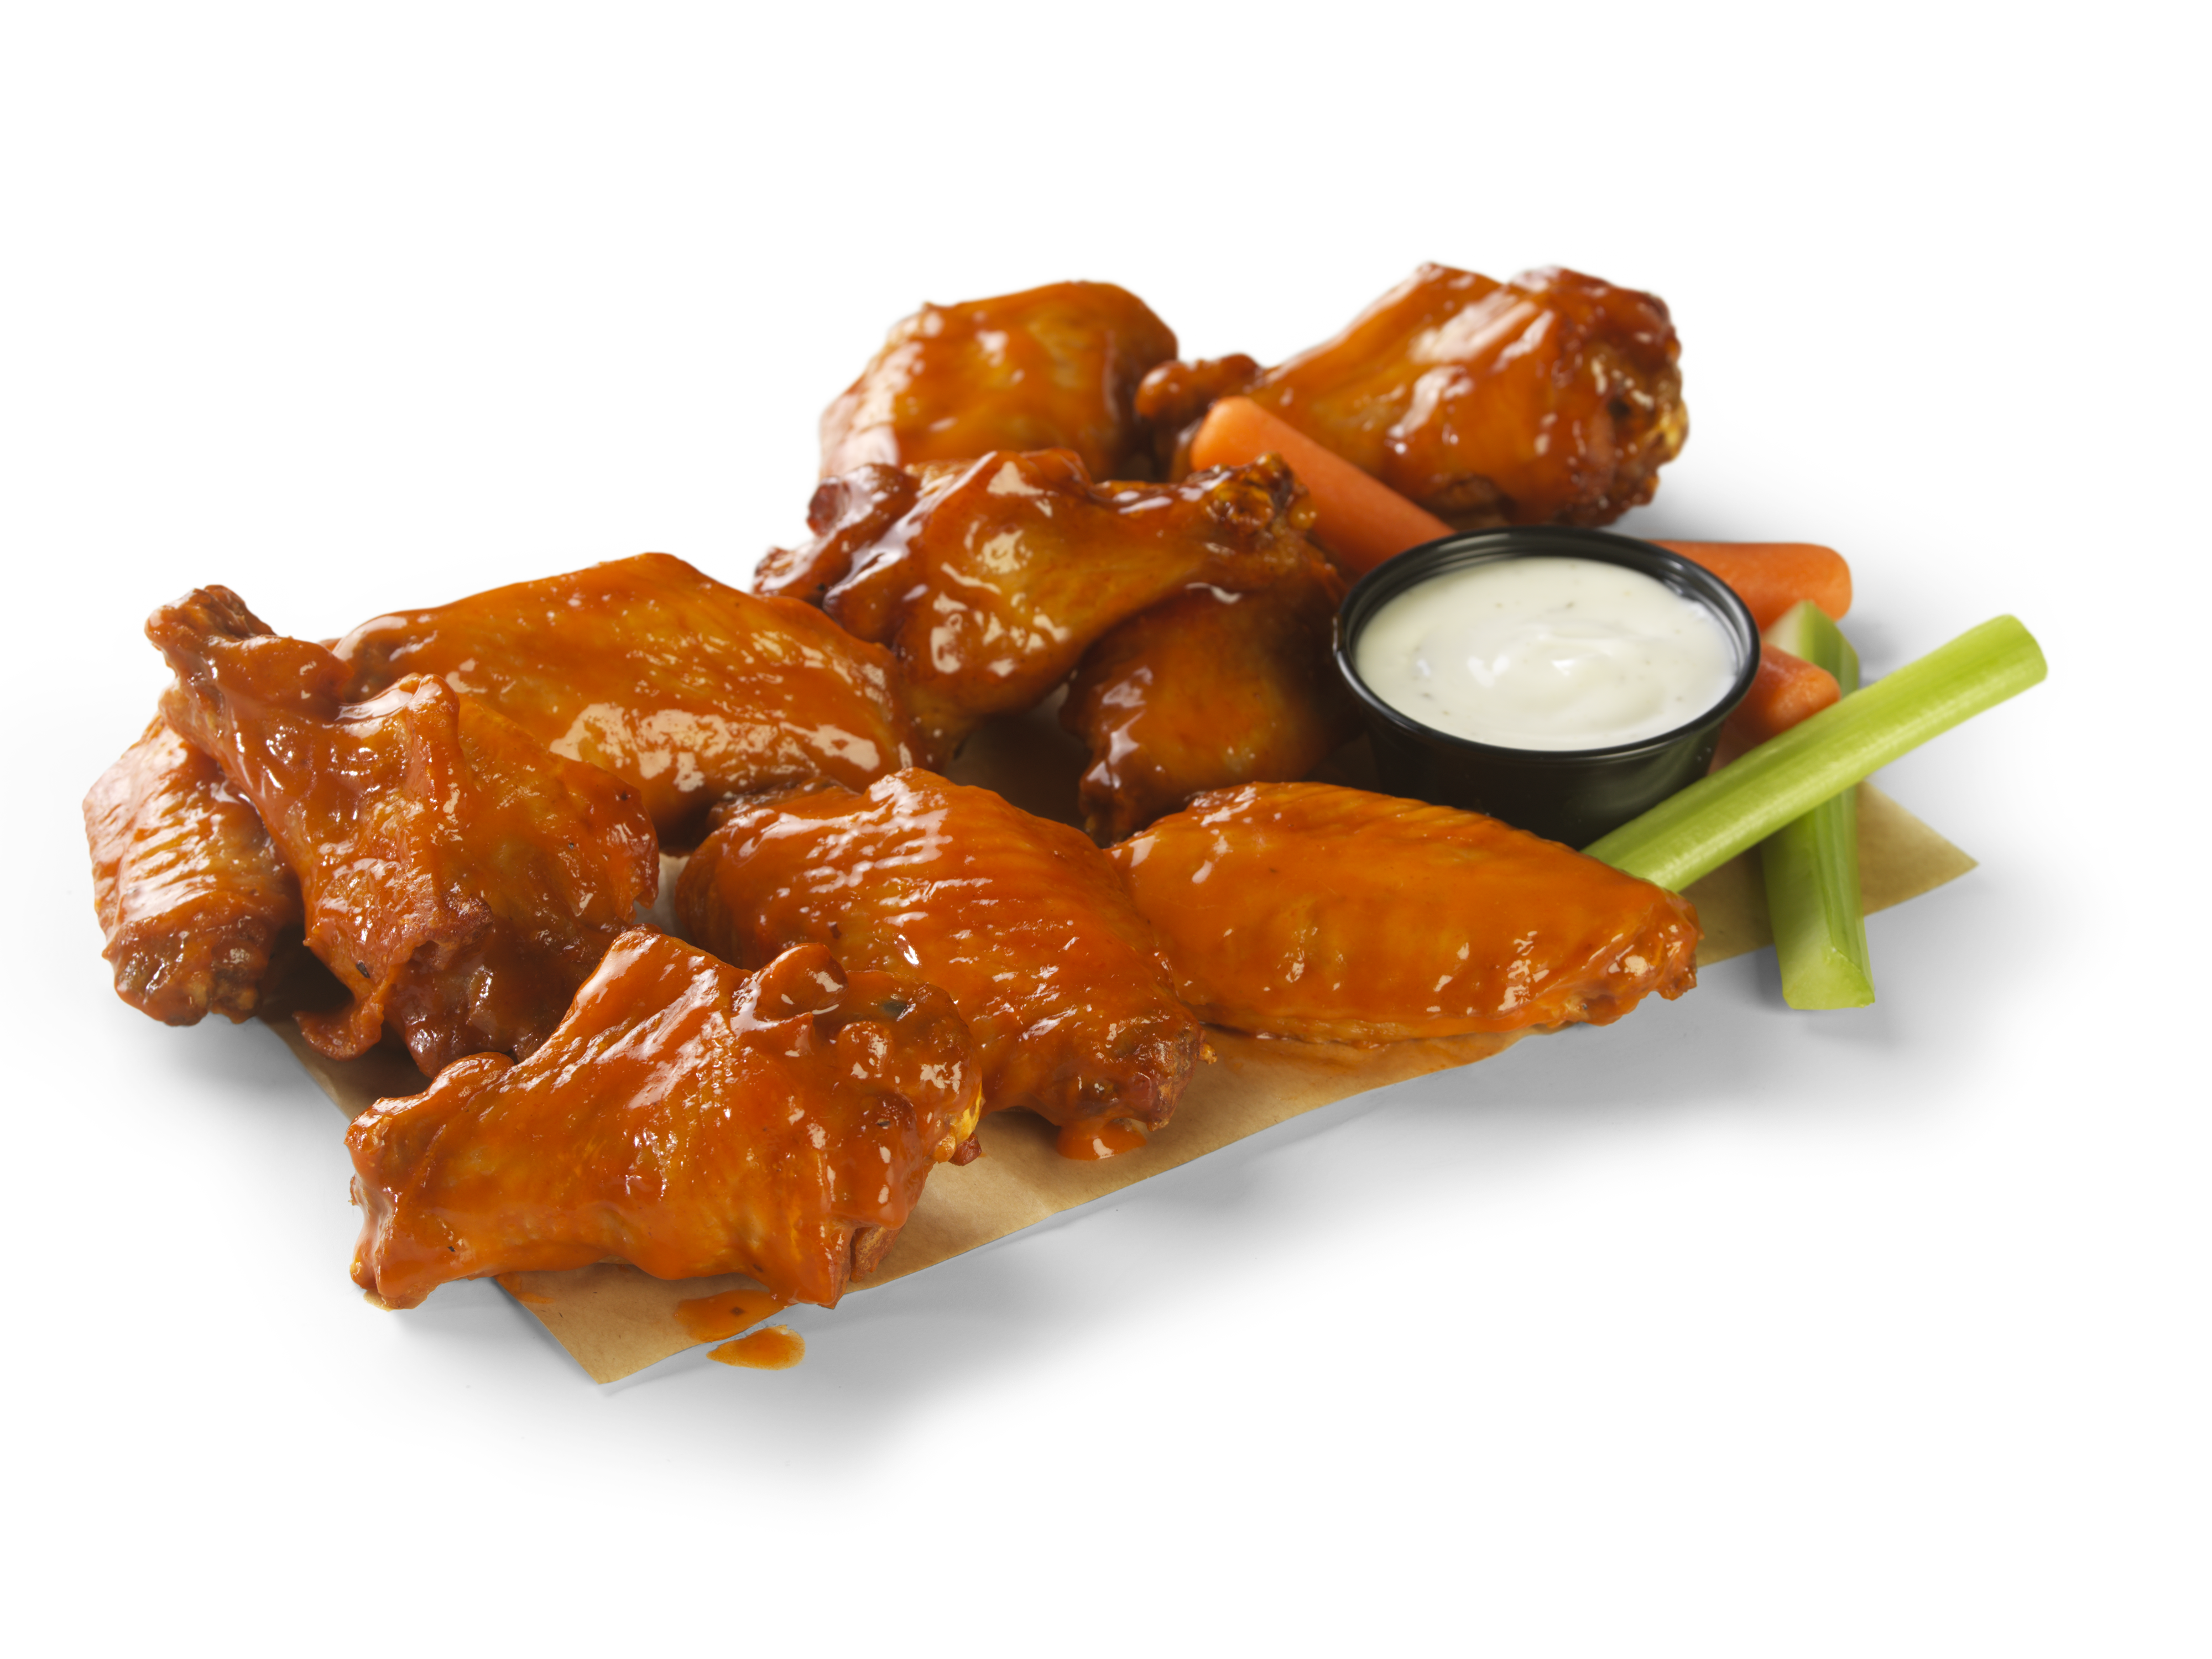 Buffalo Wild Wings Puts Together NFL Draft Day Wing Bundles Starting April  23, 2020 - Chew Boom